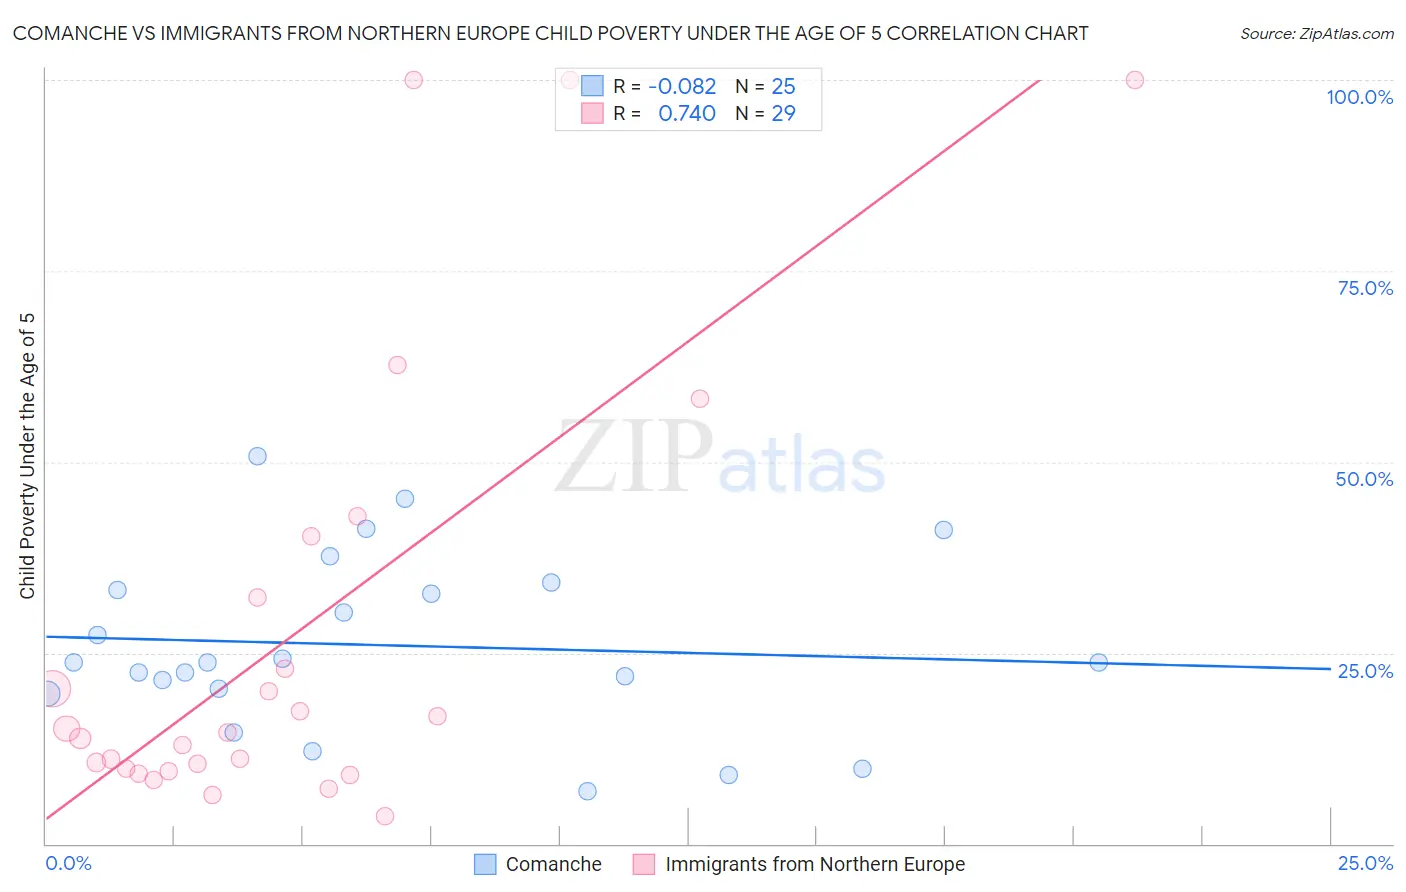 Comanche vs Immigrants from Northern Europe Child Poverty Under the Age of 5